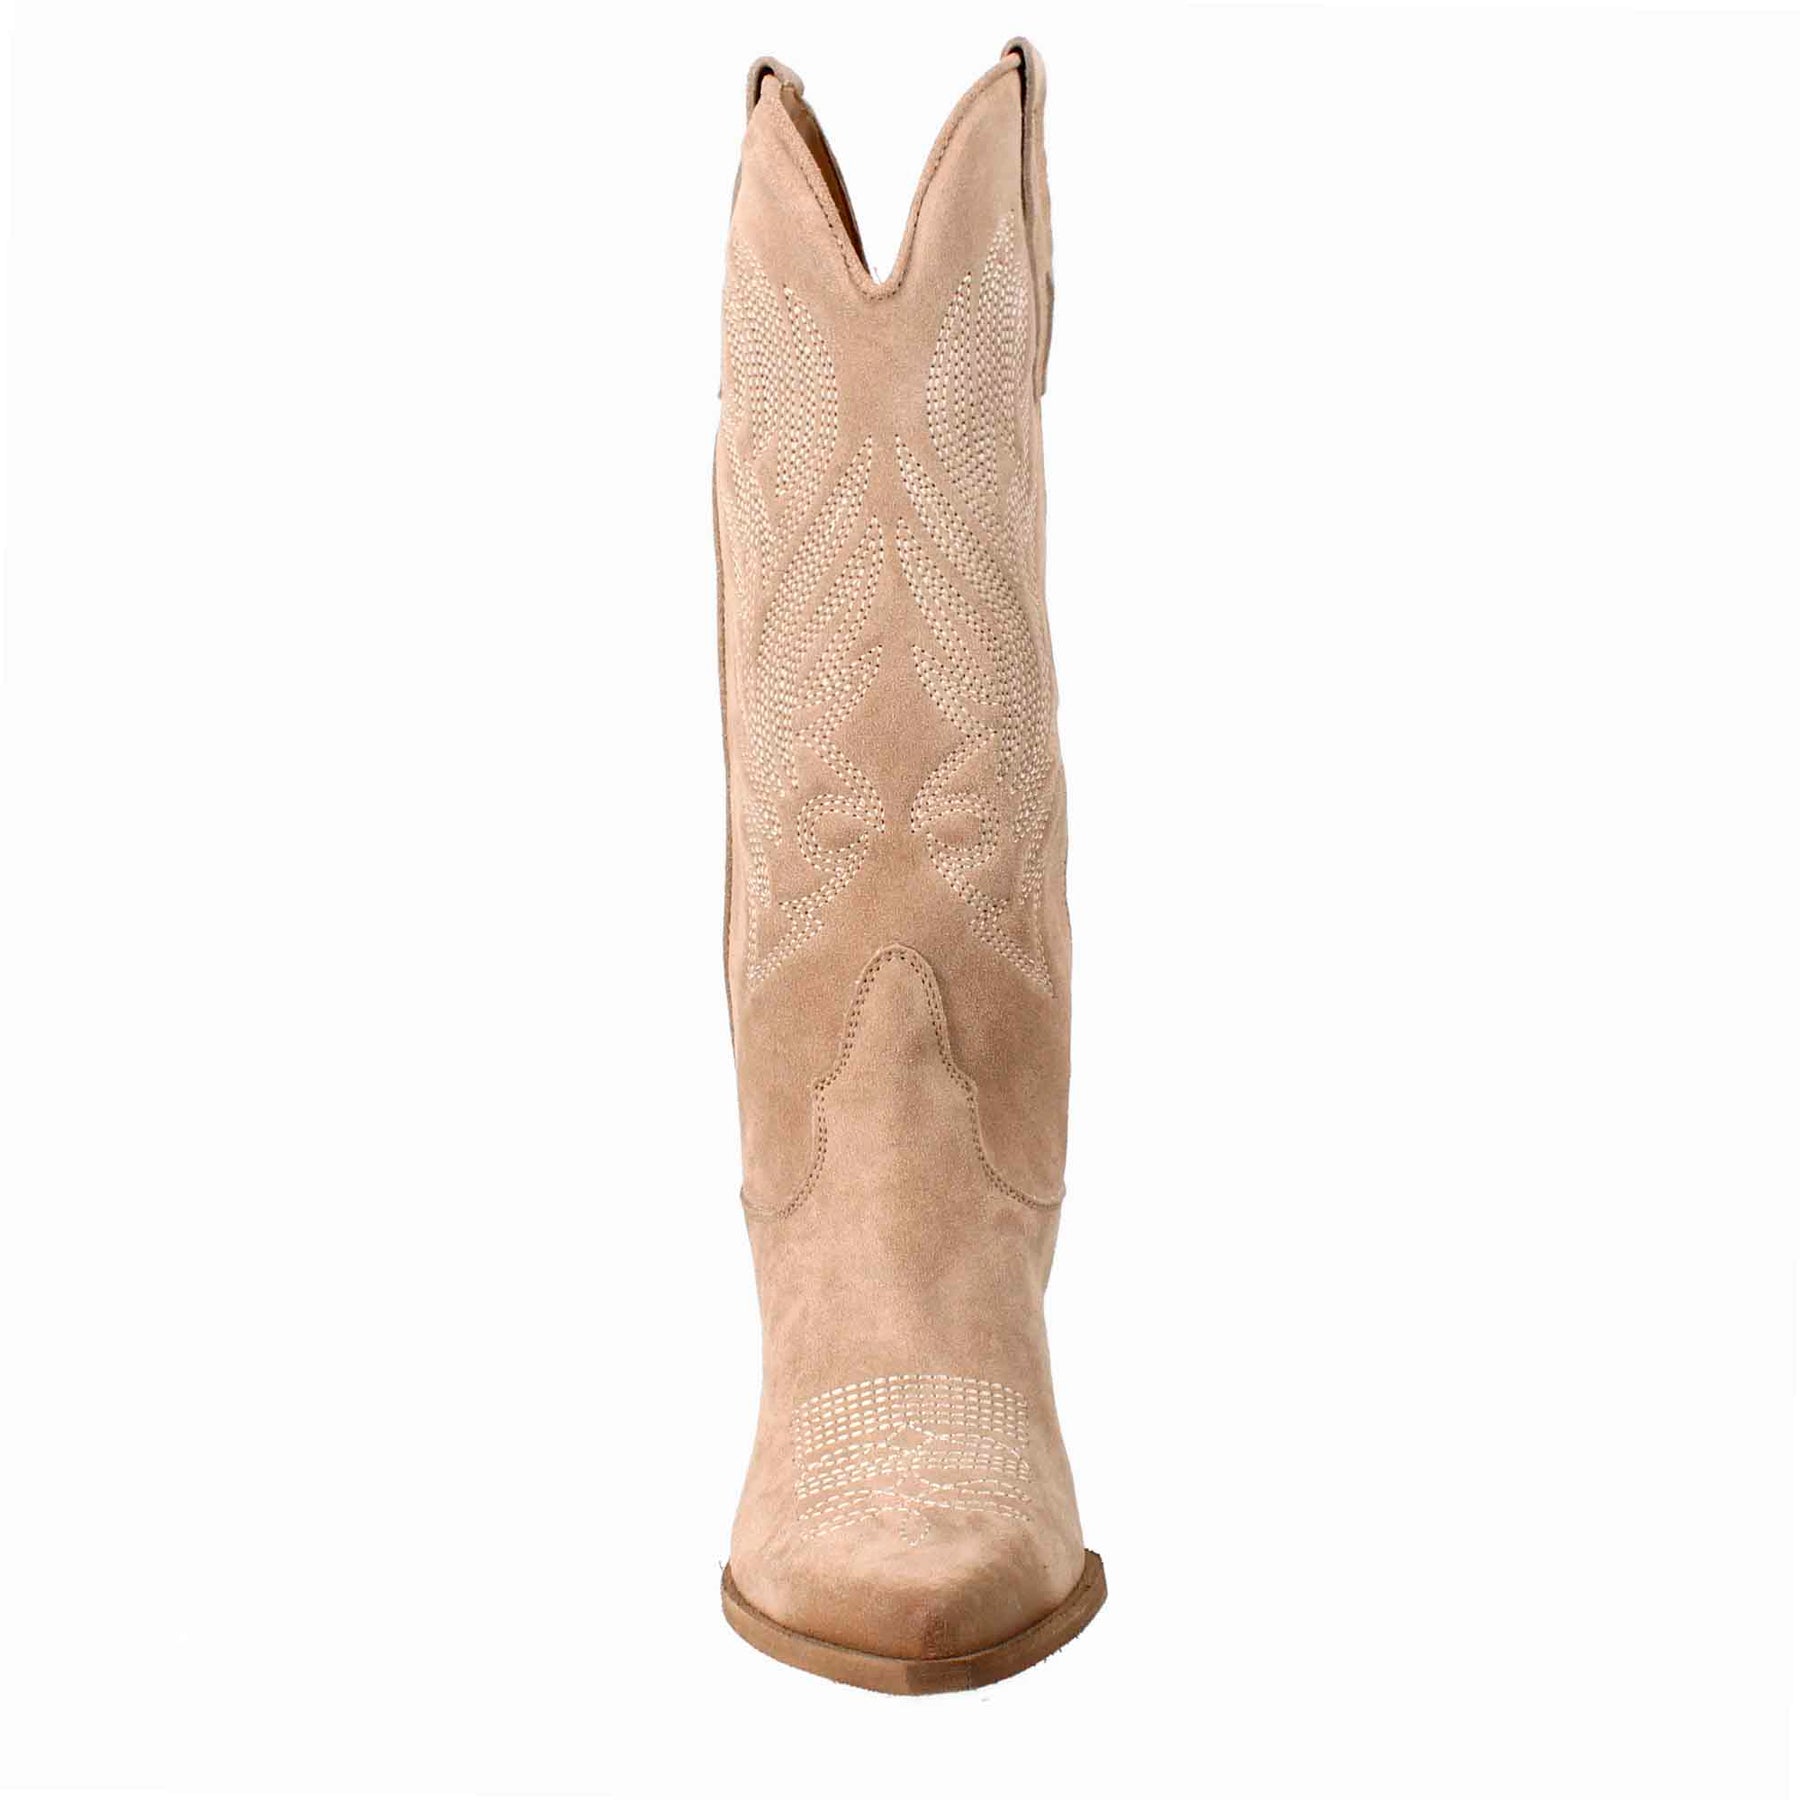 Women's medium Texan boots in light beige suede with embroidery.